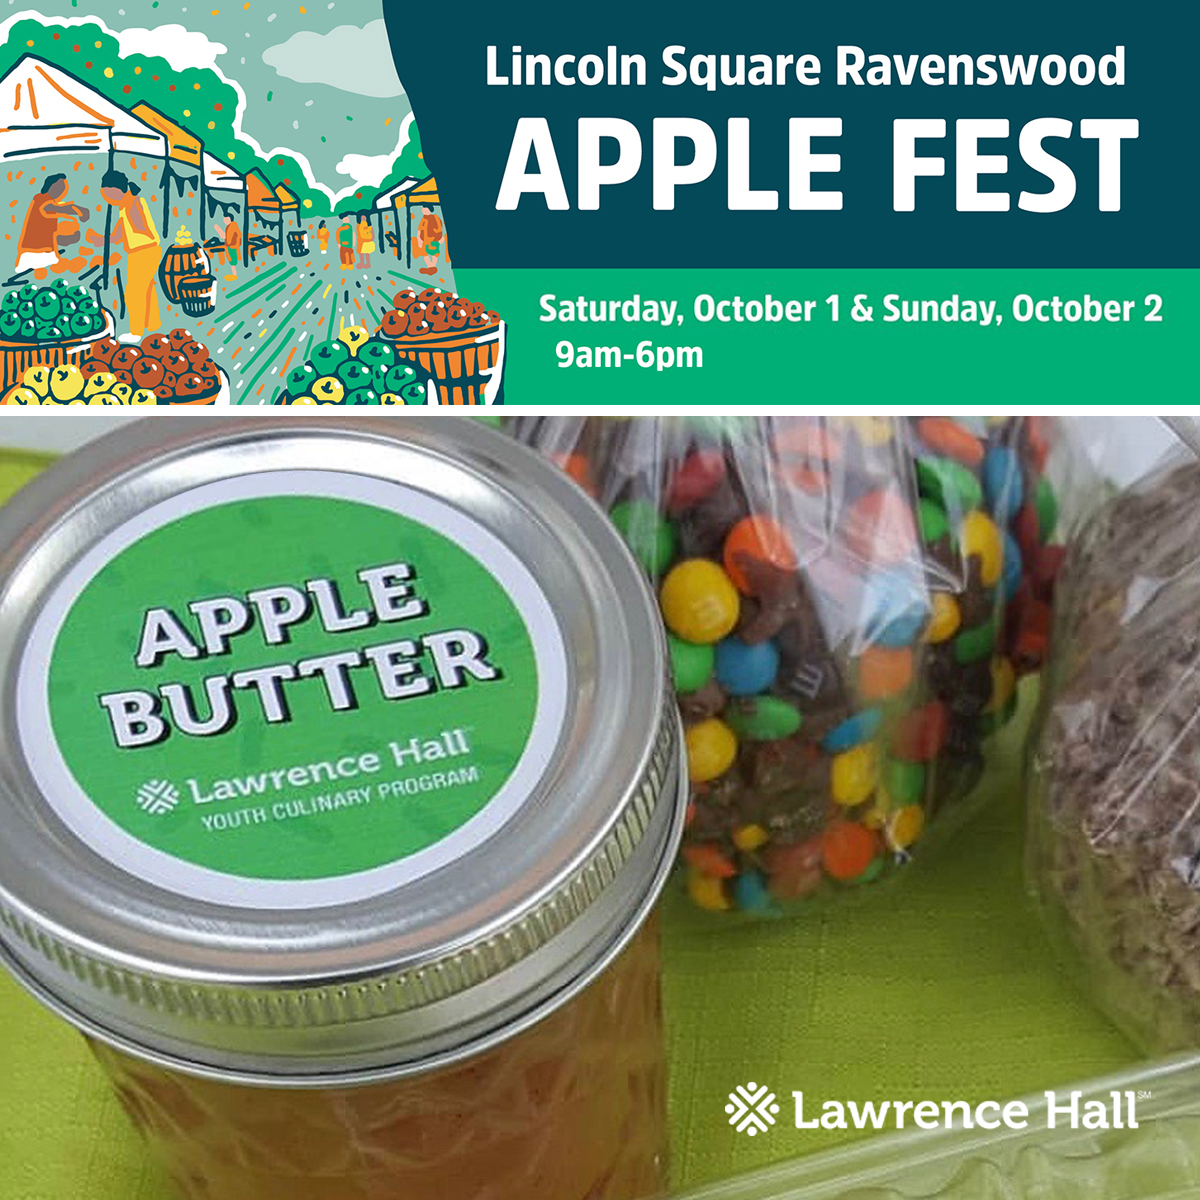 Lawrence Hall at Apple Fest Lawrence Hall